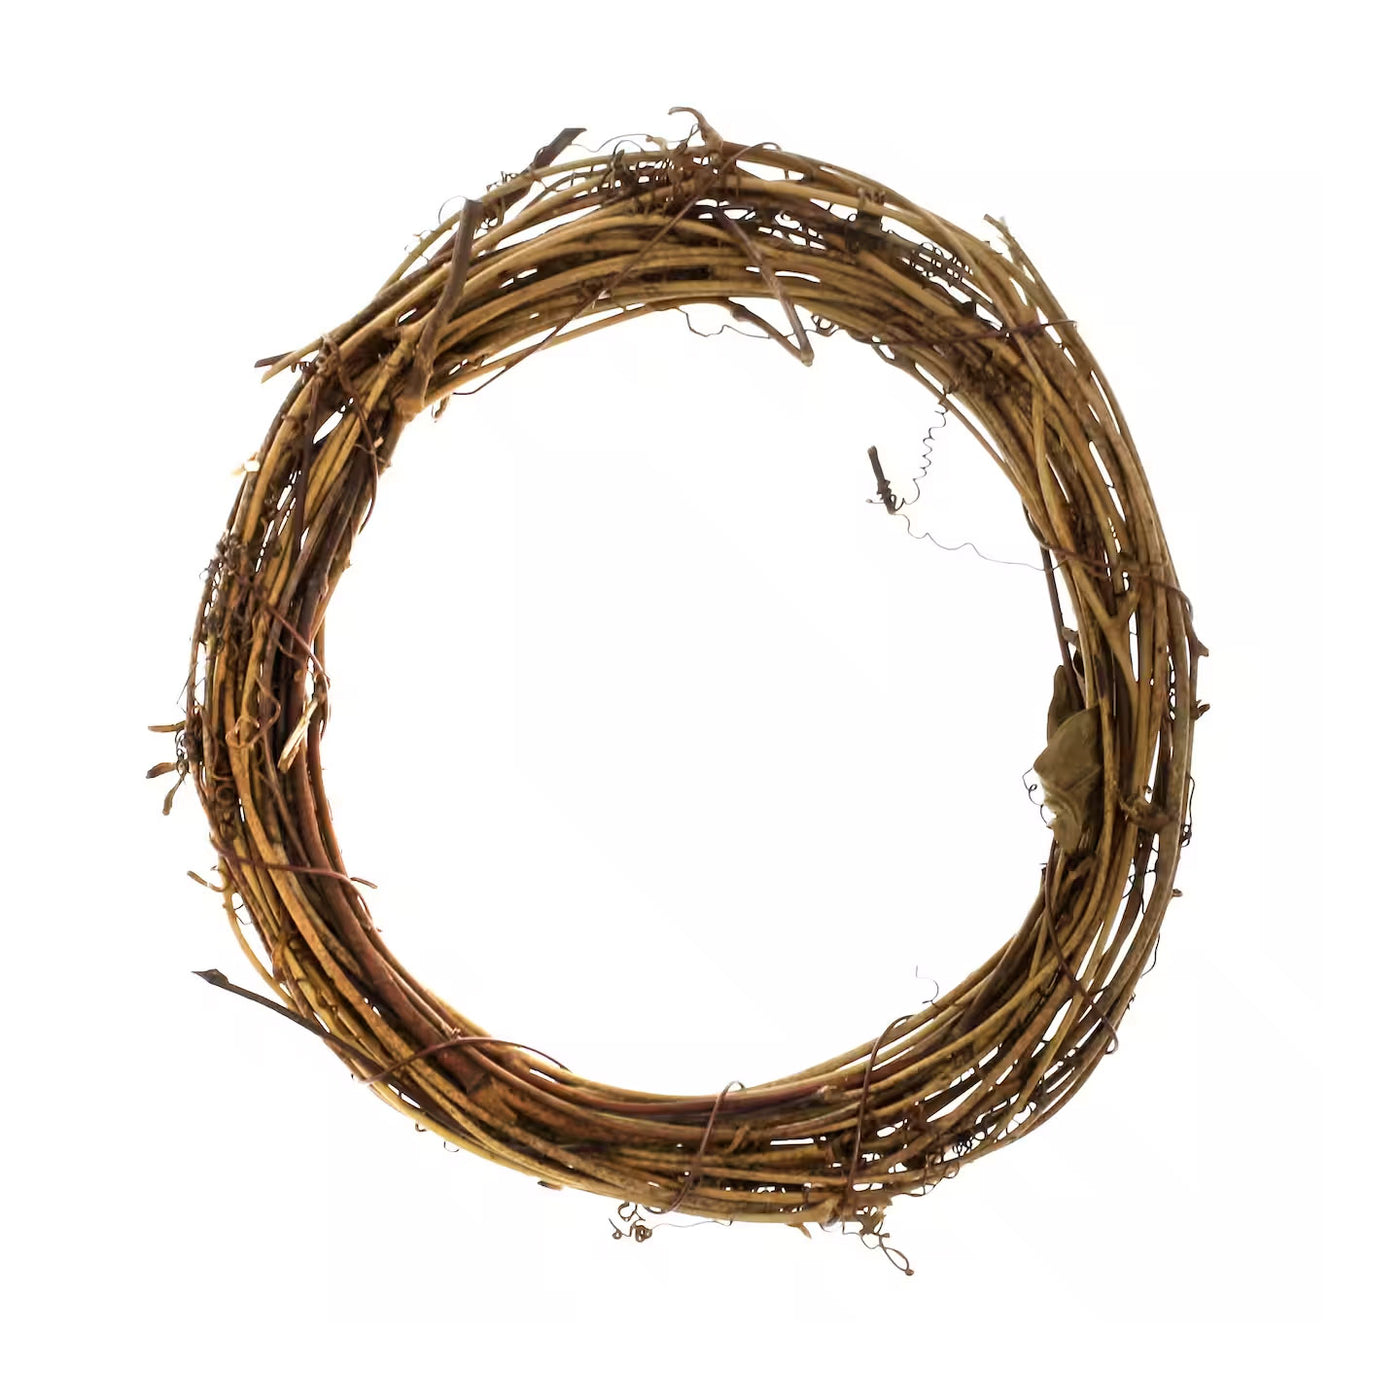 6" Grapevine Wreath Candle Ring